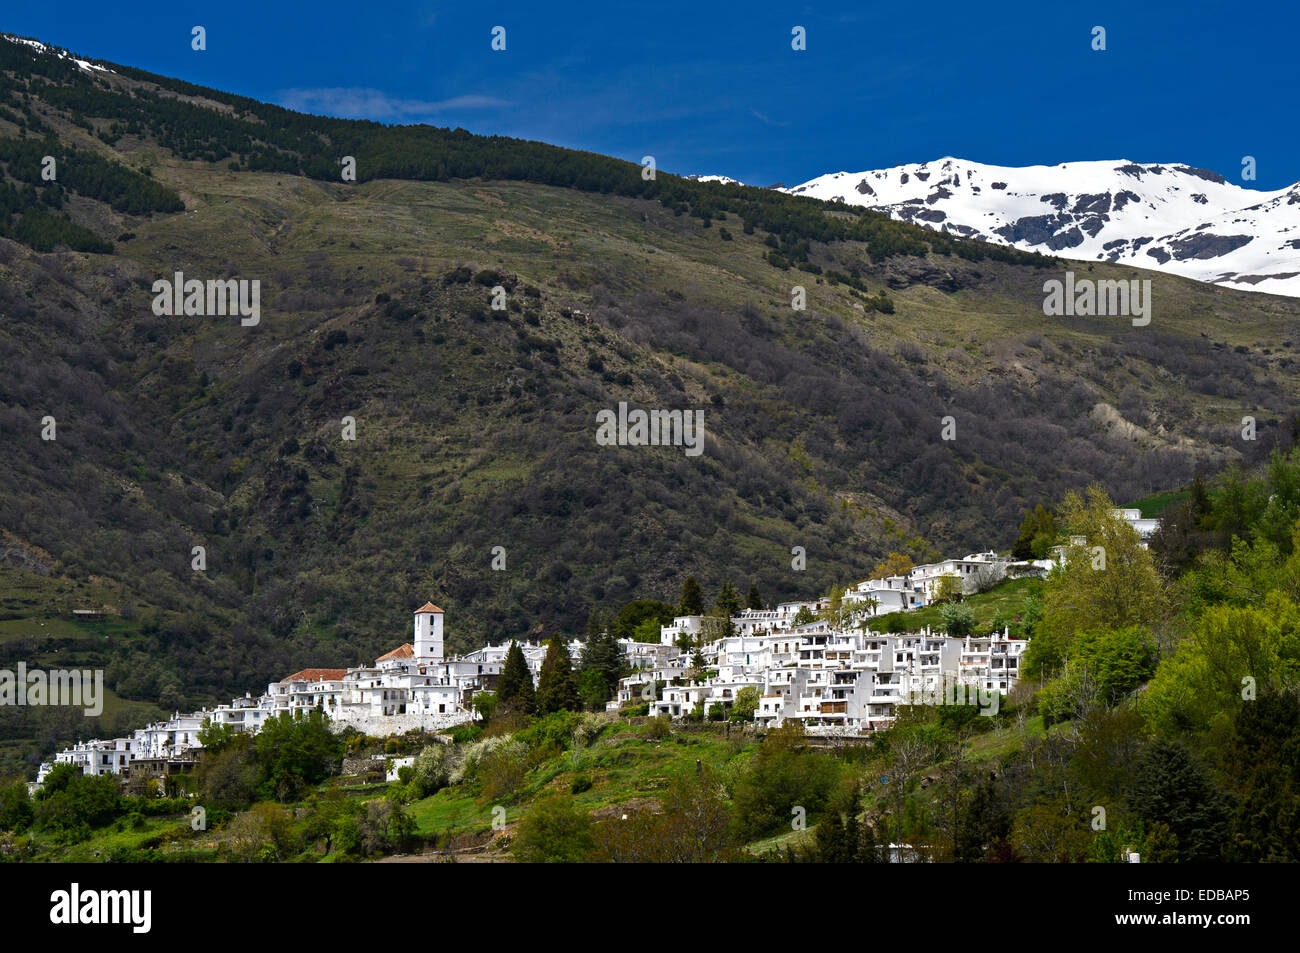 View at the village Capileira, Alpujarra region, behind the snow-covered mountains of the Sierra Nevada, Andalusia, Spain Stock Photo